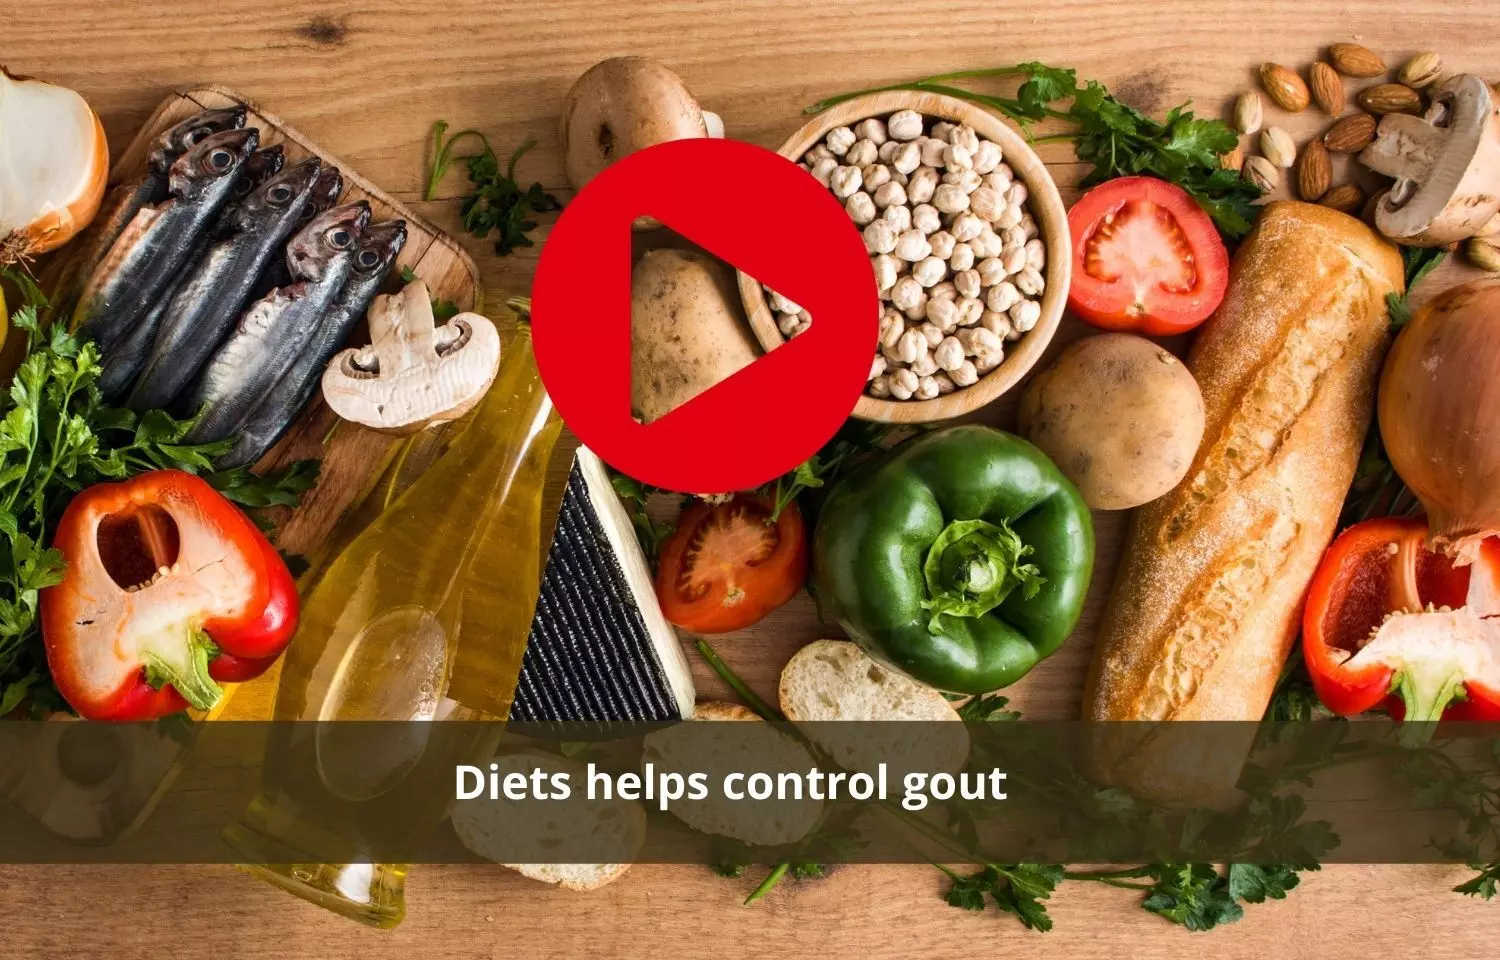 Dietary changes can help control gout